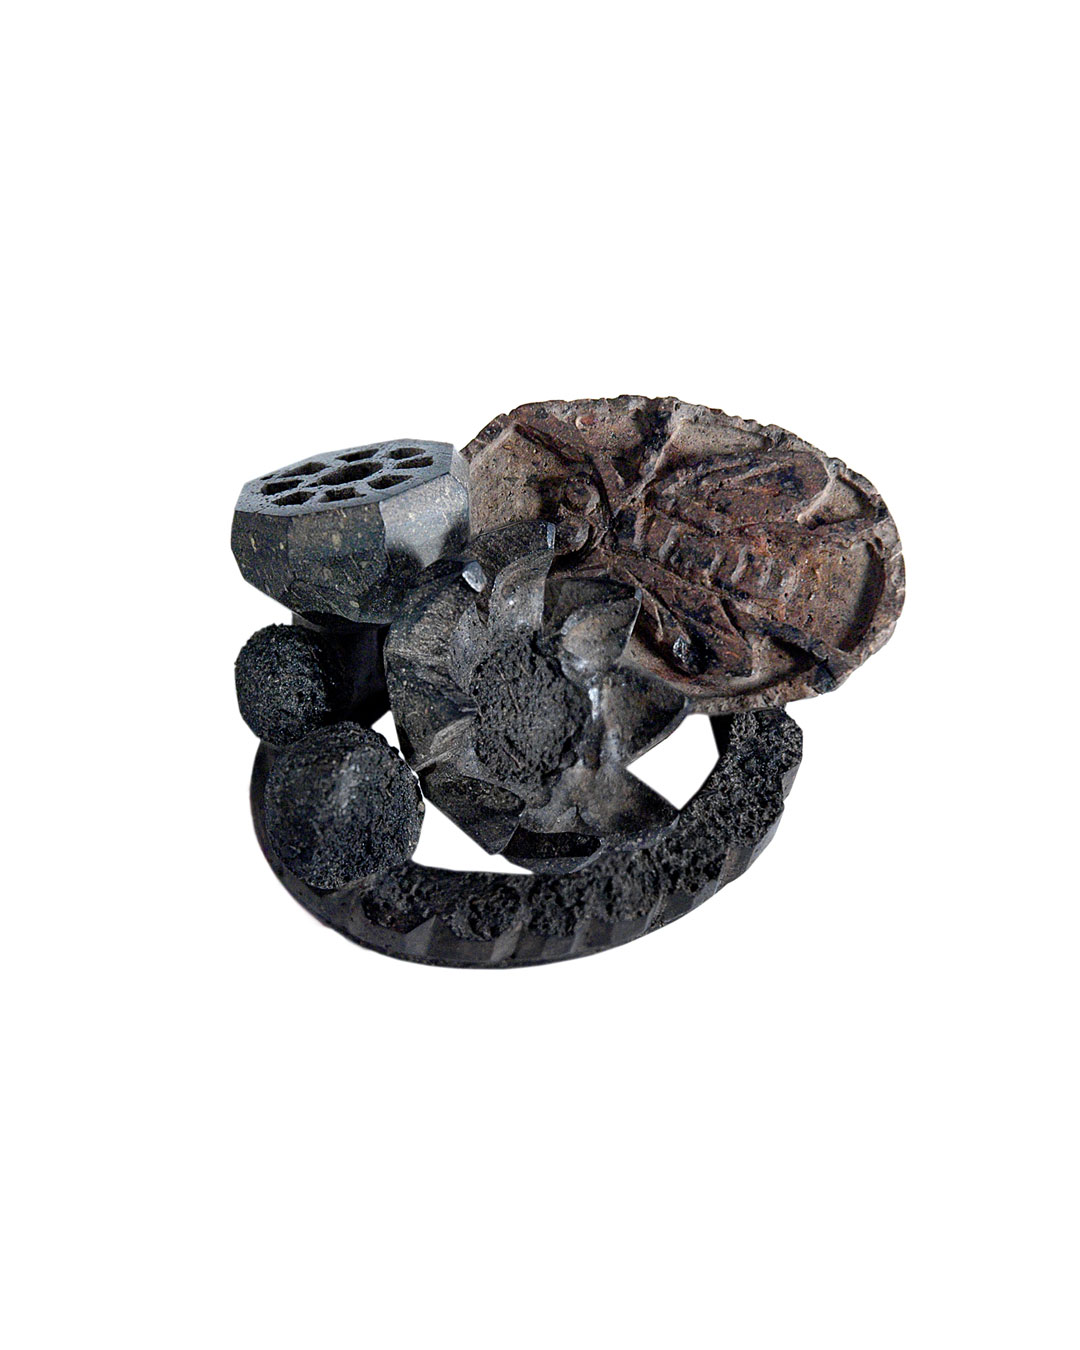 Carmen Hauser, Shadow World 1, 2012, brooch; soil, rose leaves, synthetic resin, oxidised silver, 82 x 60 x 56 mm, €1670